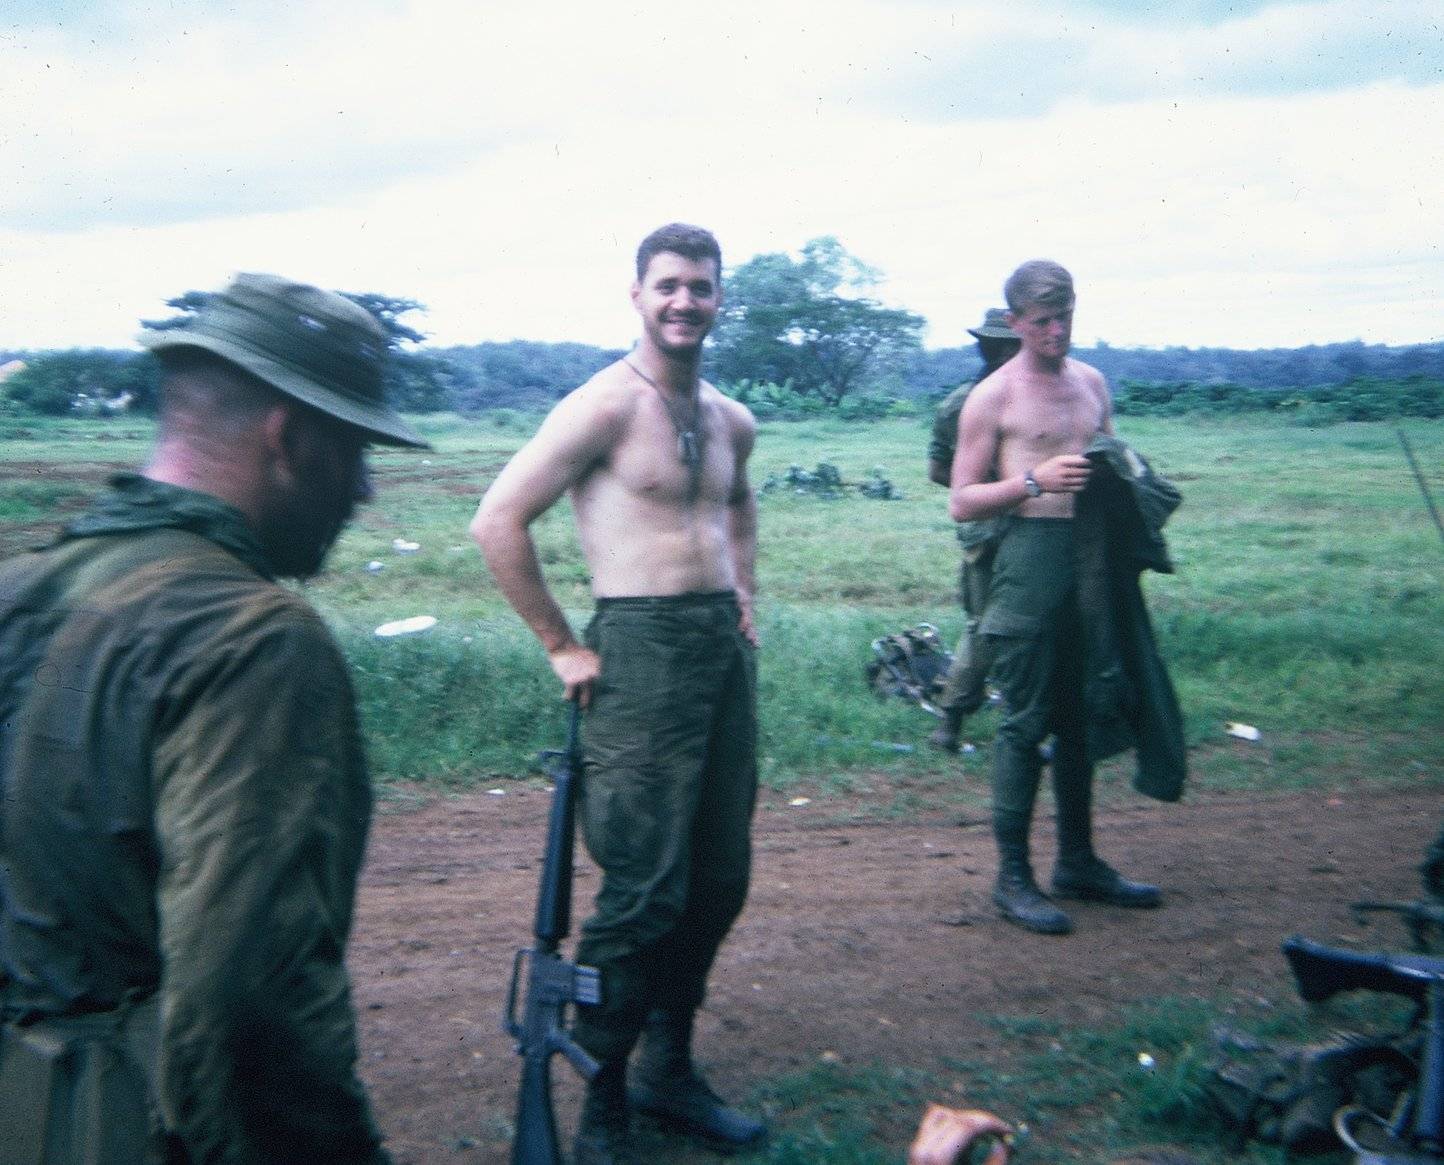 U.S. soldiers standing in a lush clearing.